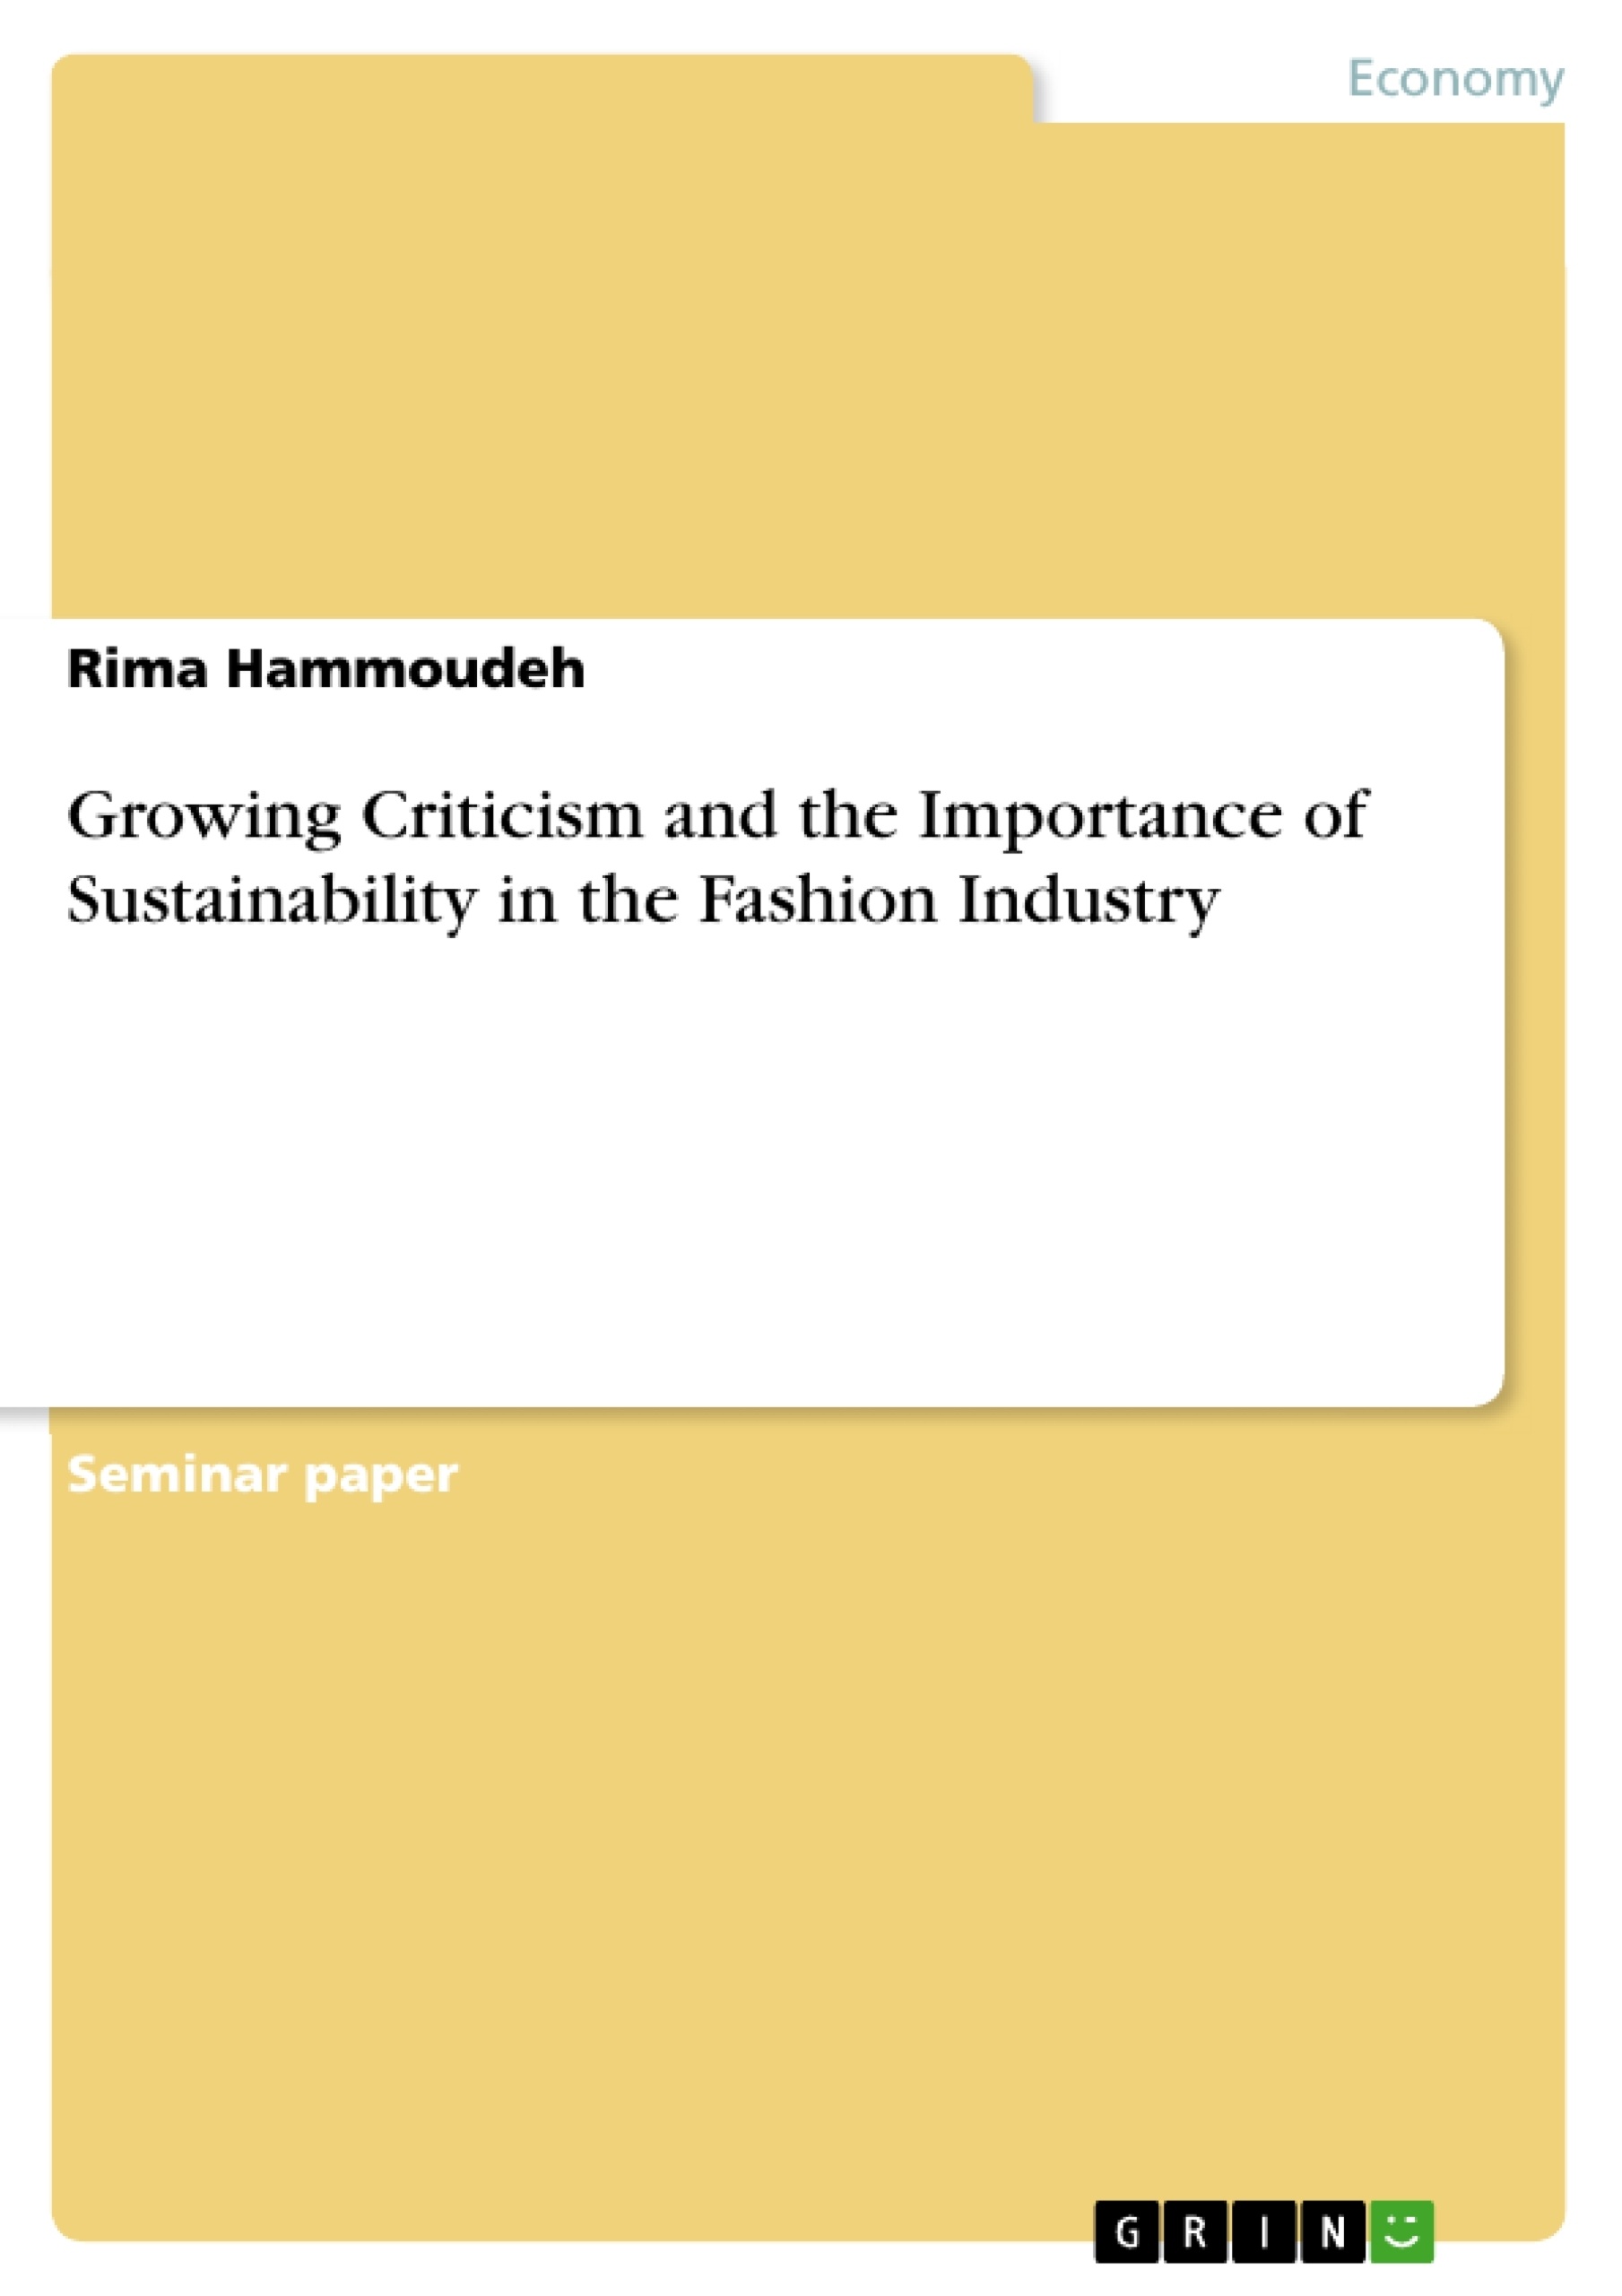 Title: Growing Criticism and the Importance of Sustainability in the Fashion Industry